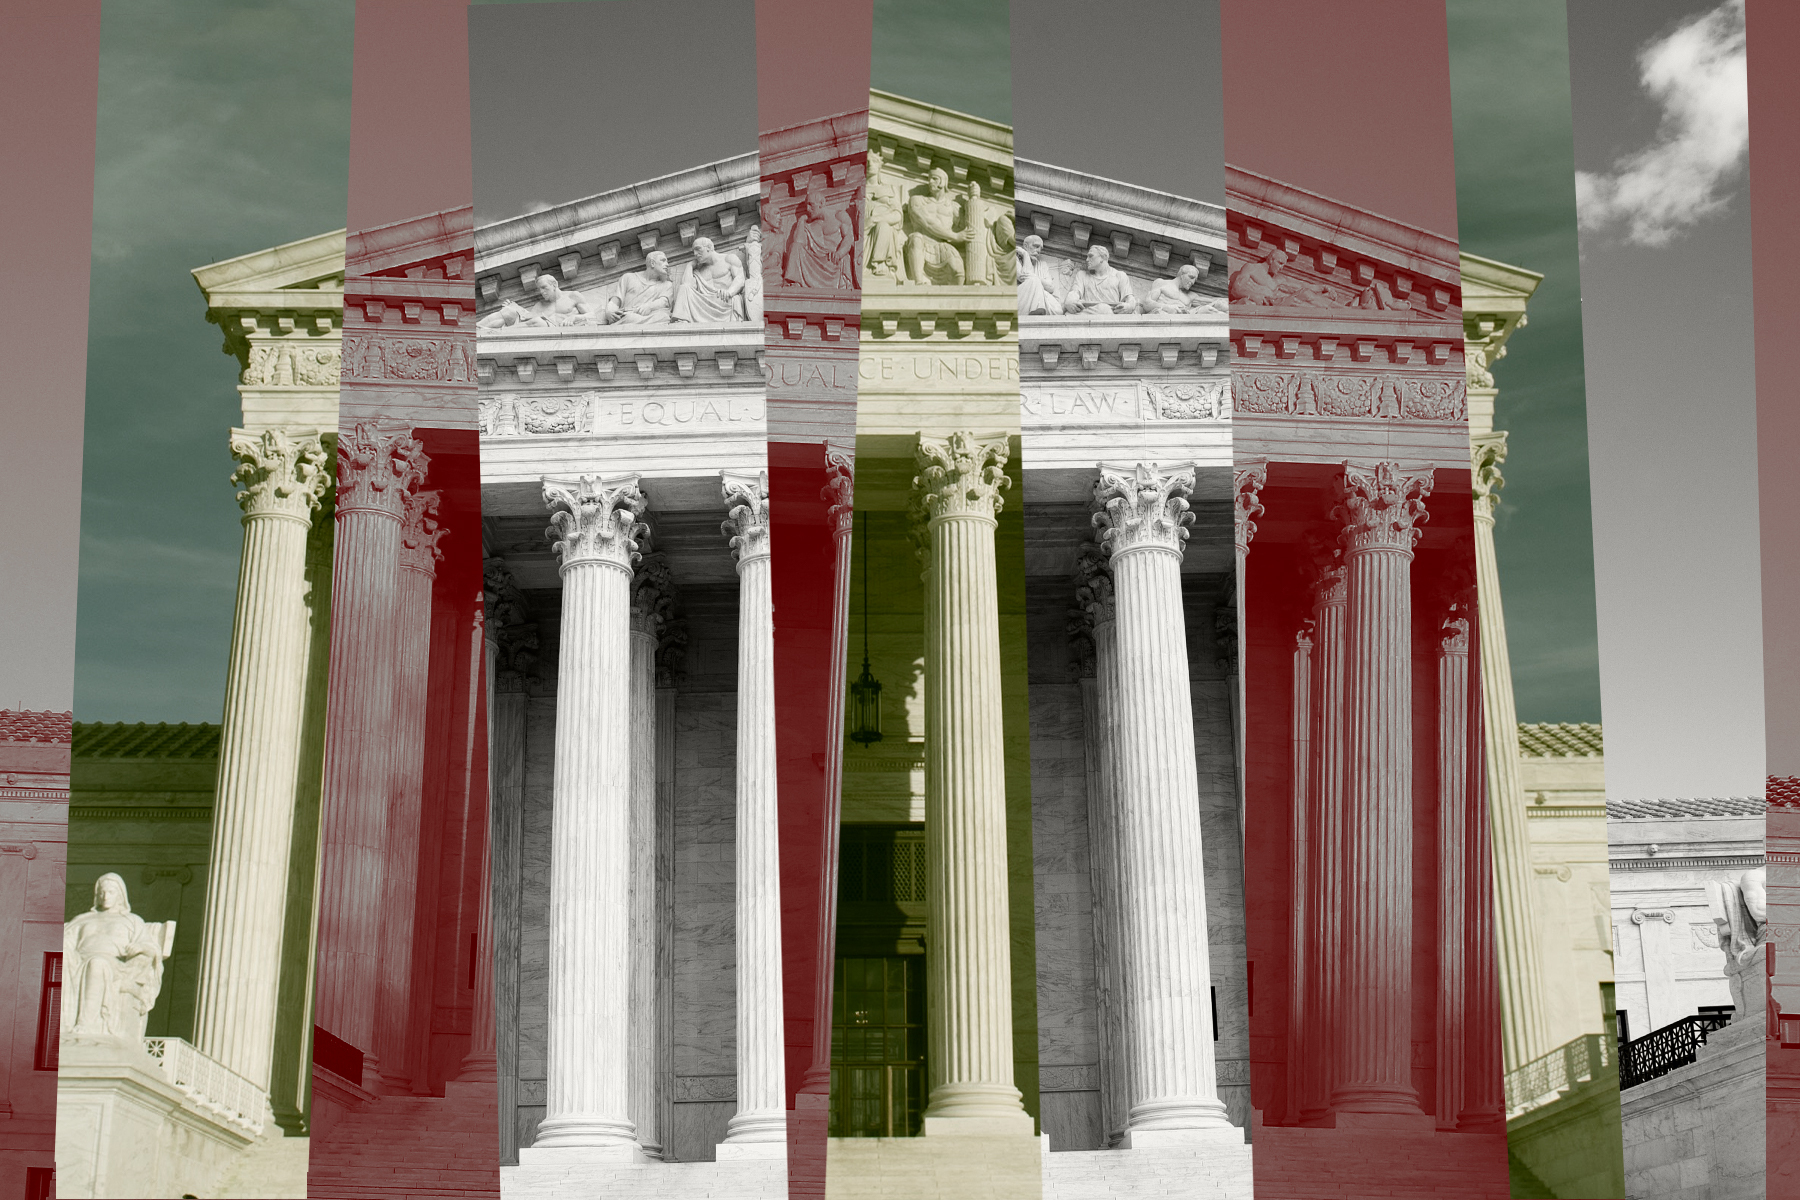 Guns A Wealth Tax And War On Regulators: What We re Watching On SCOTUS